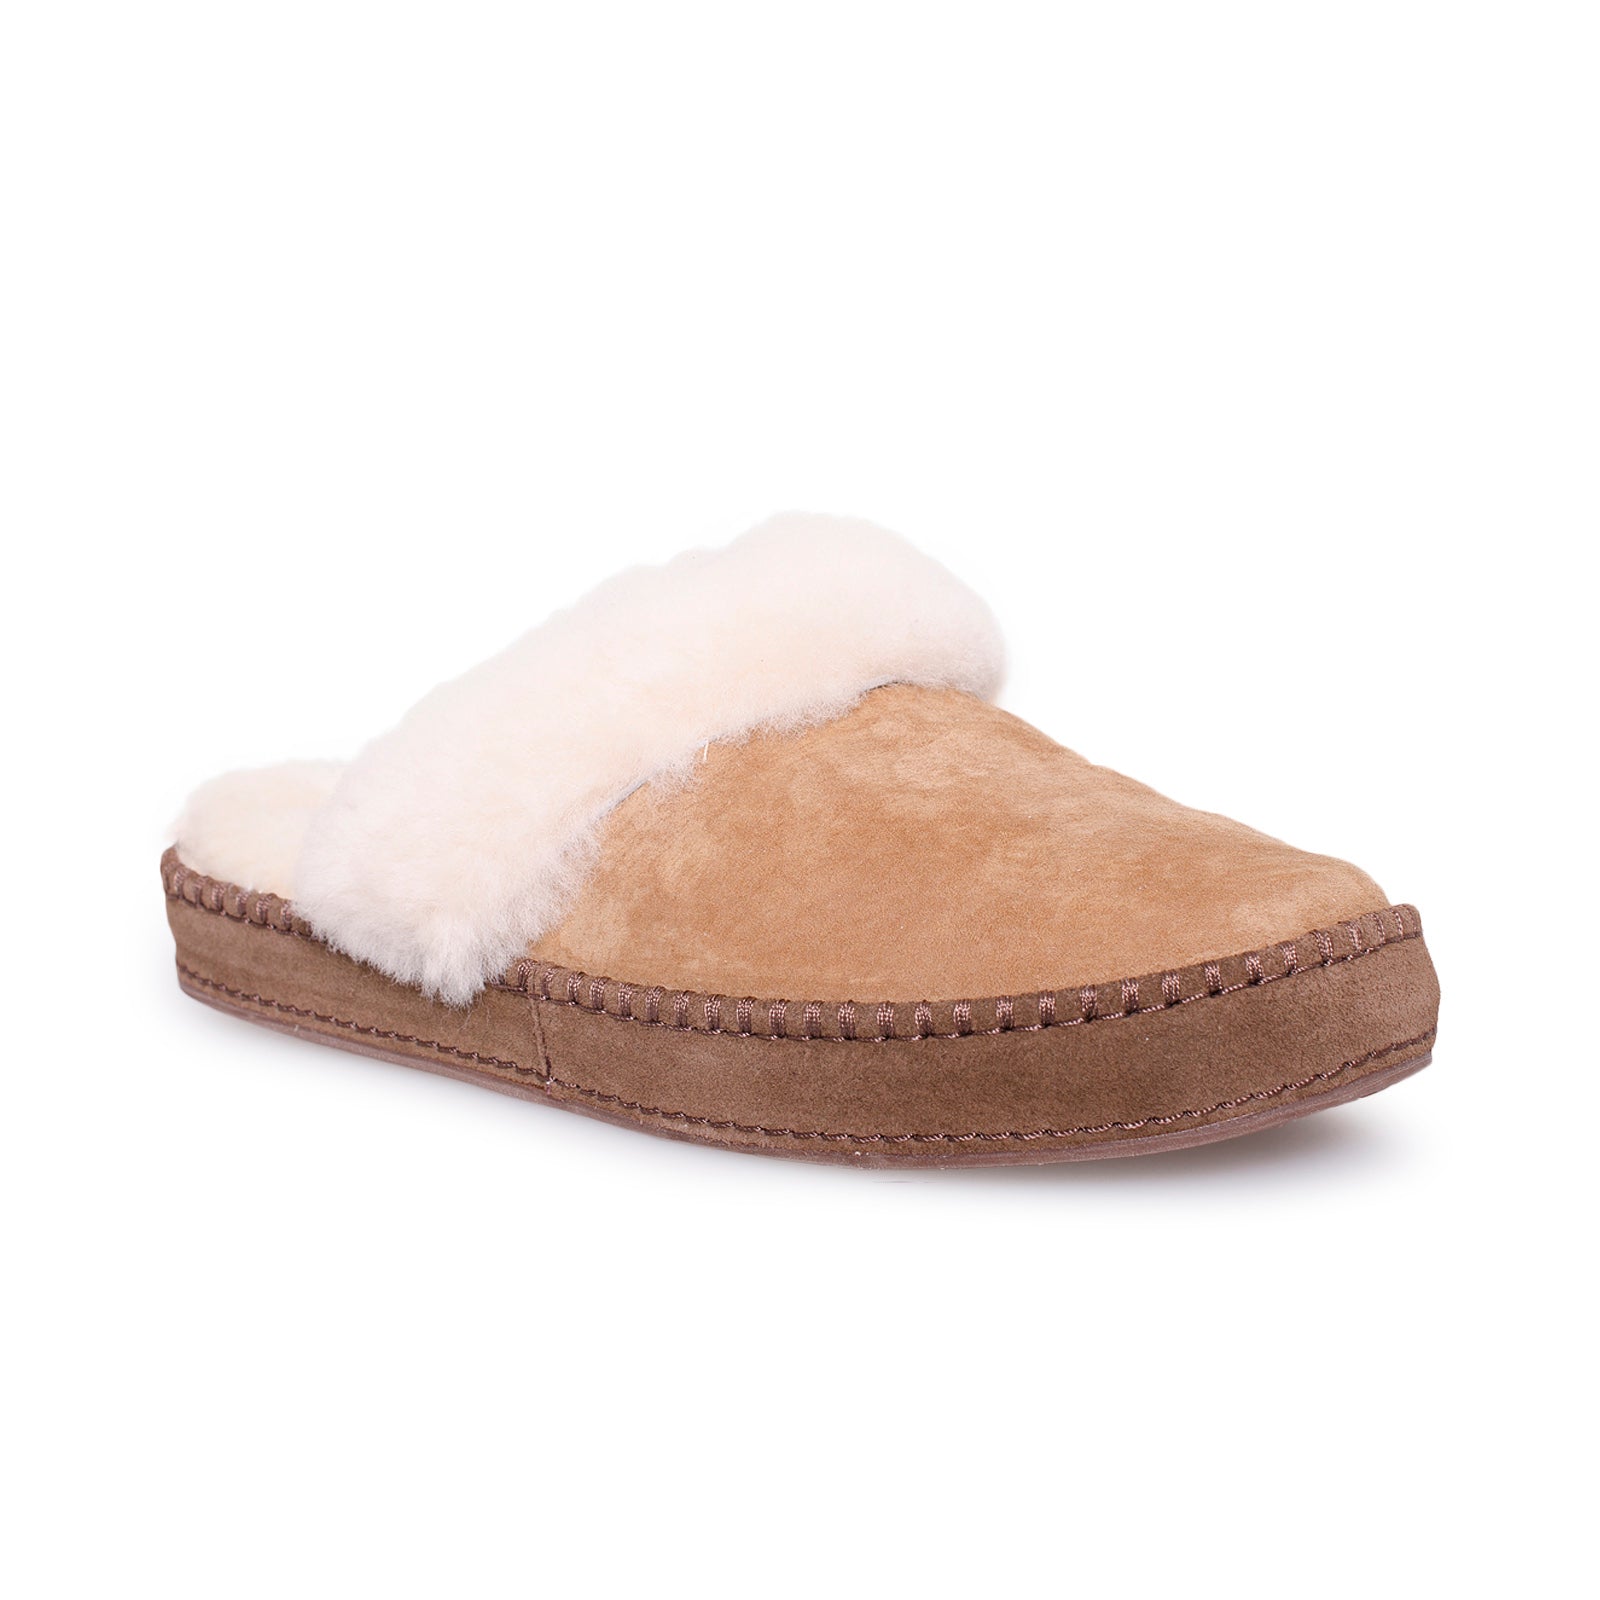 ugg aira slippers size 9